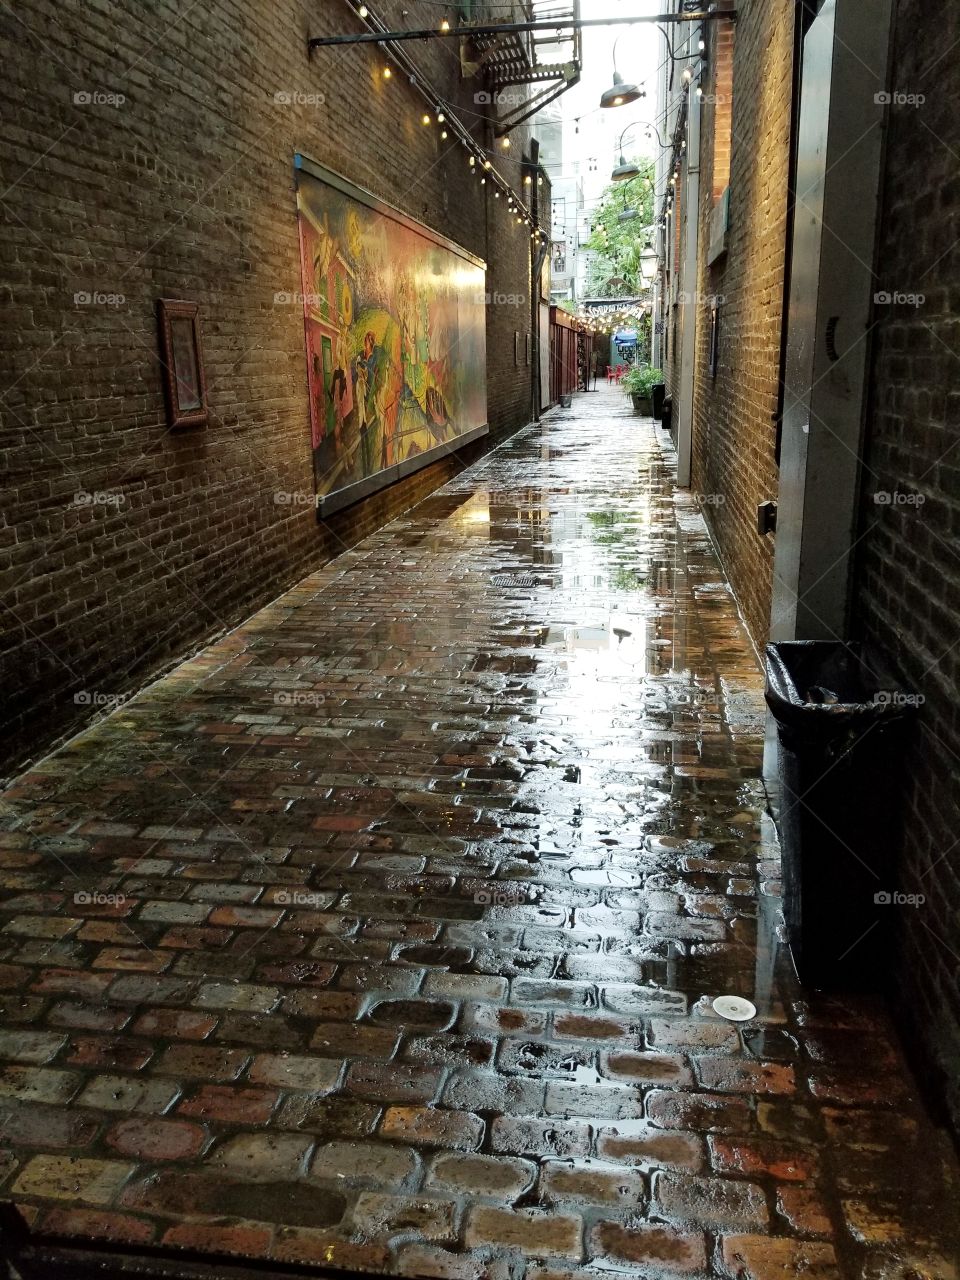 Alley, Street, Narrow, Architecture, Tunnel